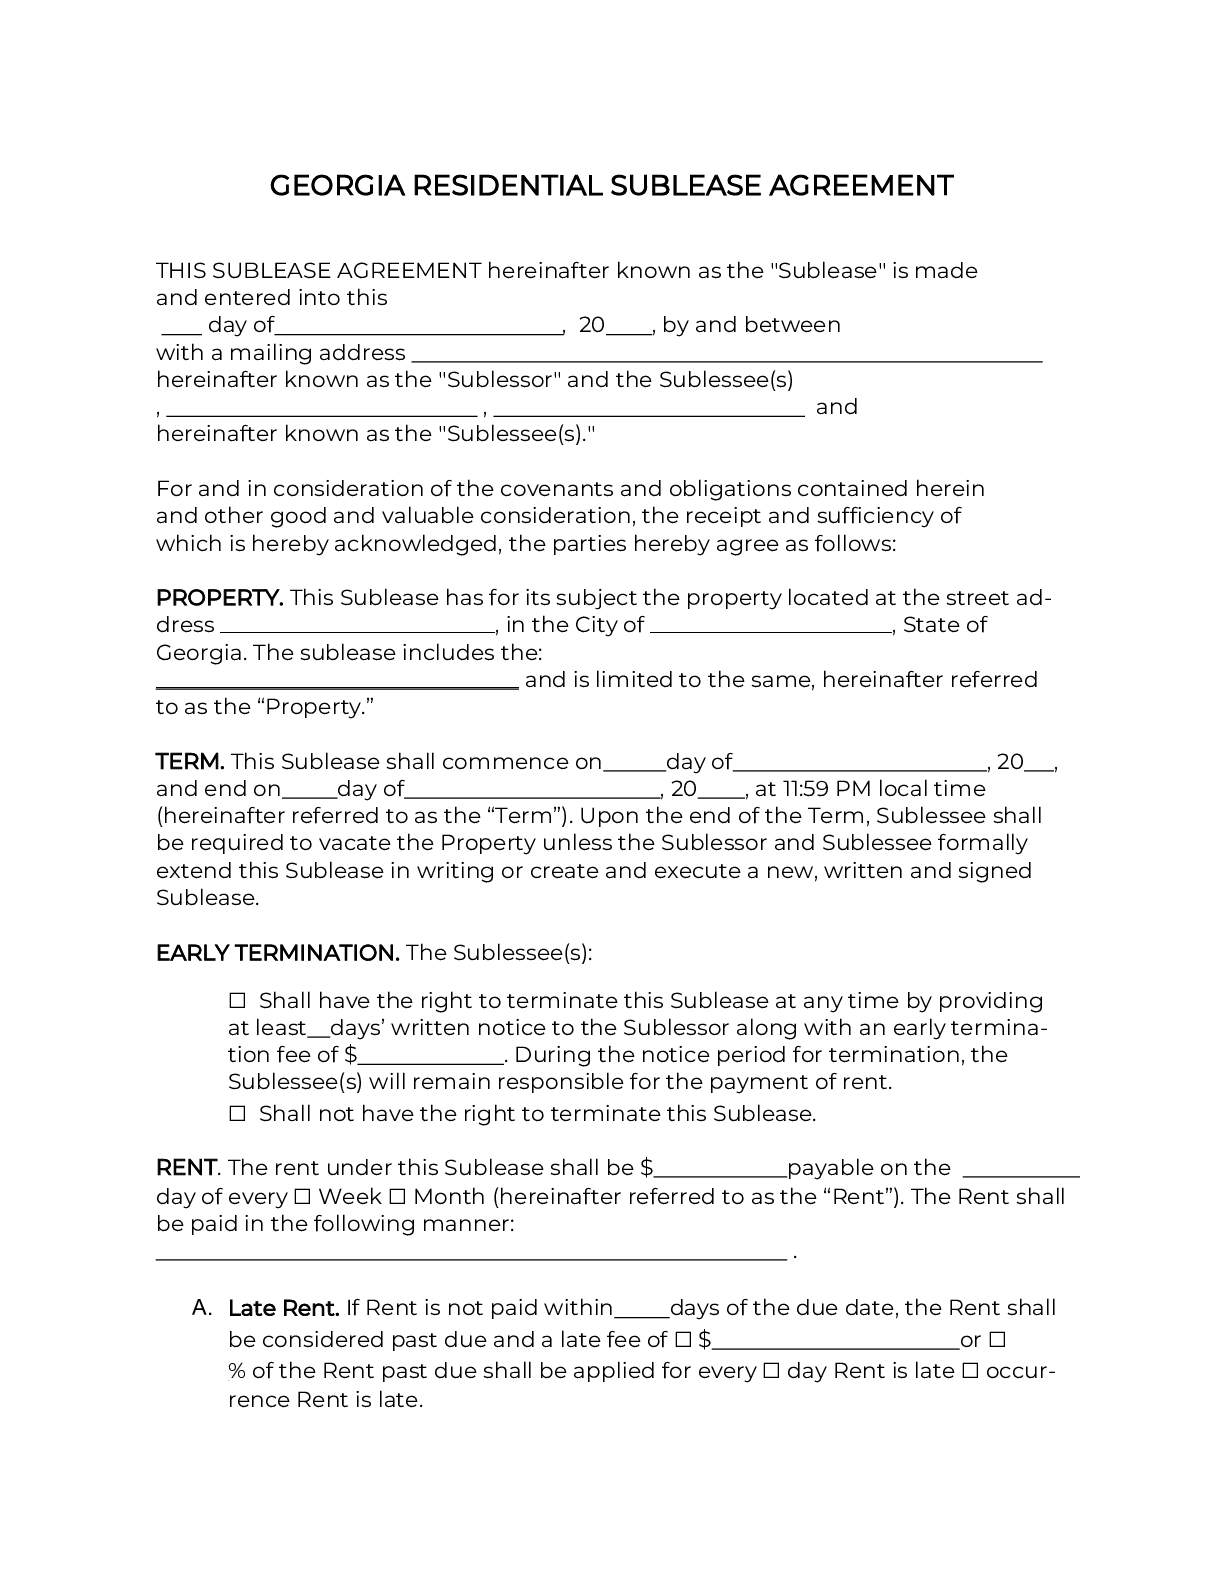 home-rental-lease-agreement-georgia-printable-form-templates-and-letter